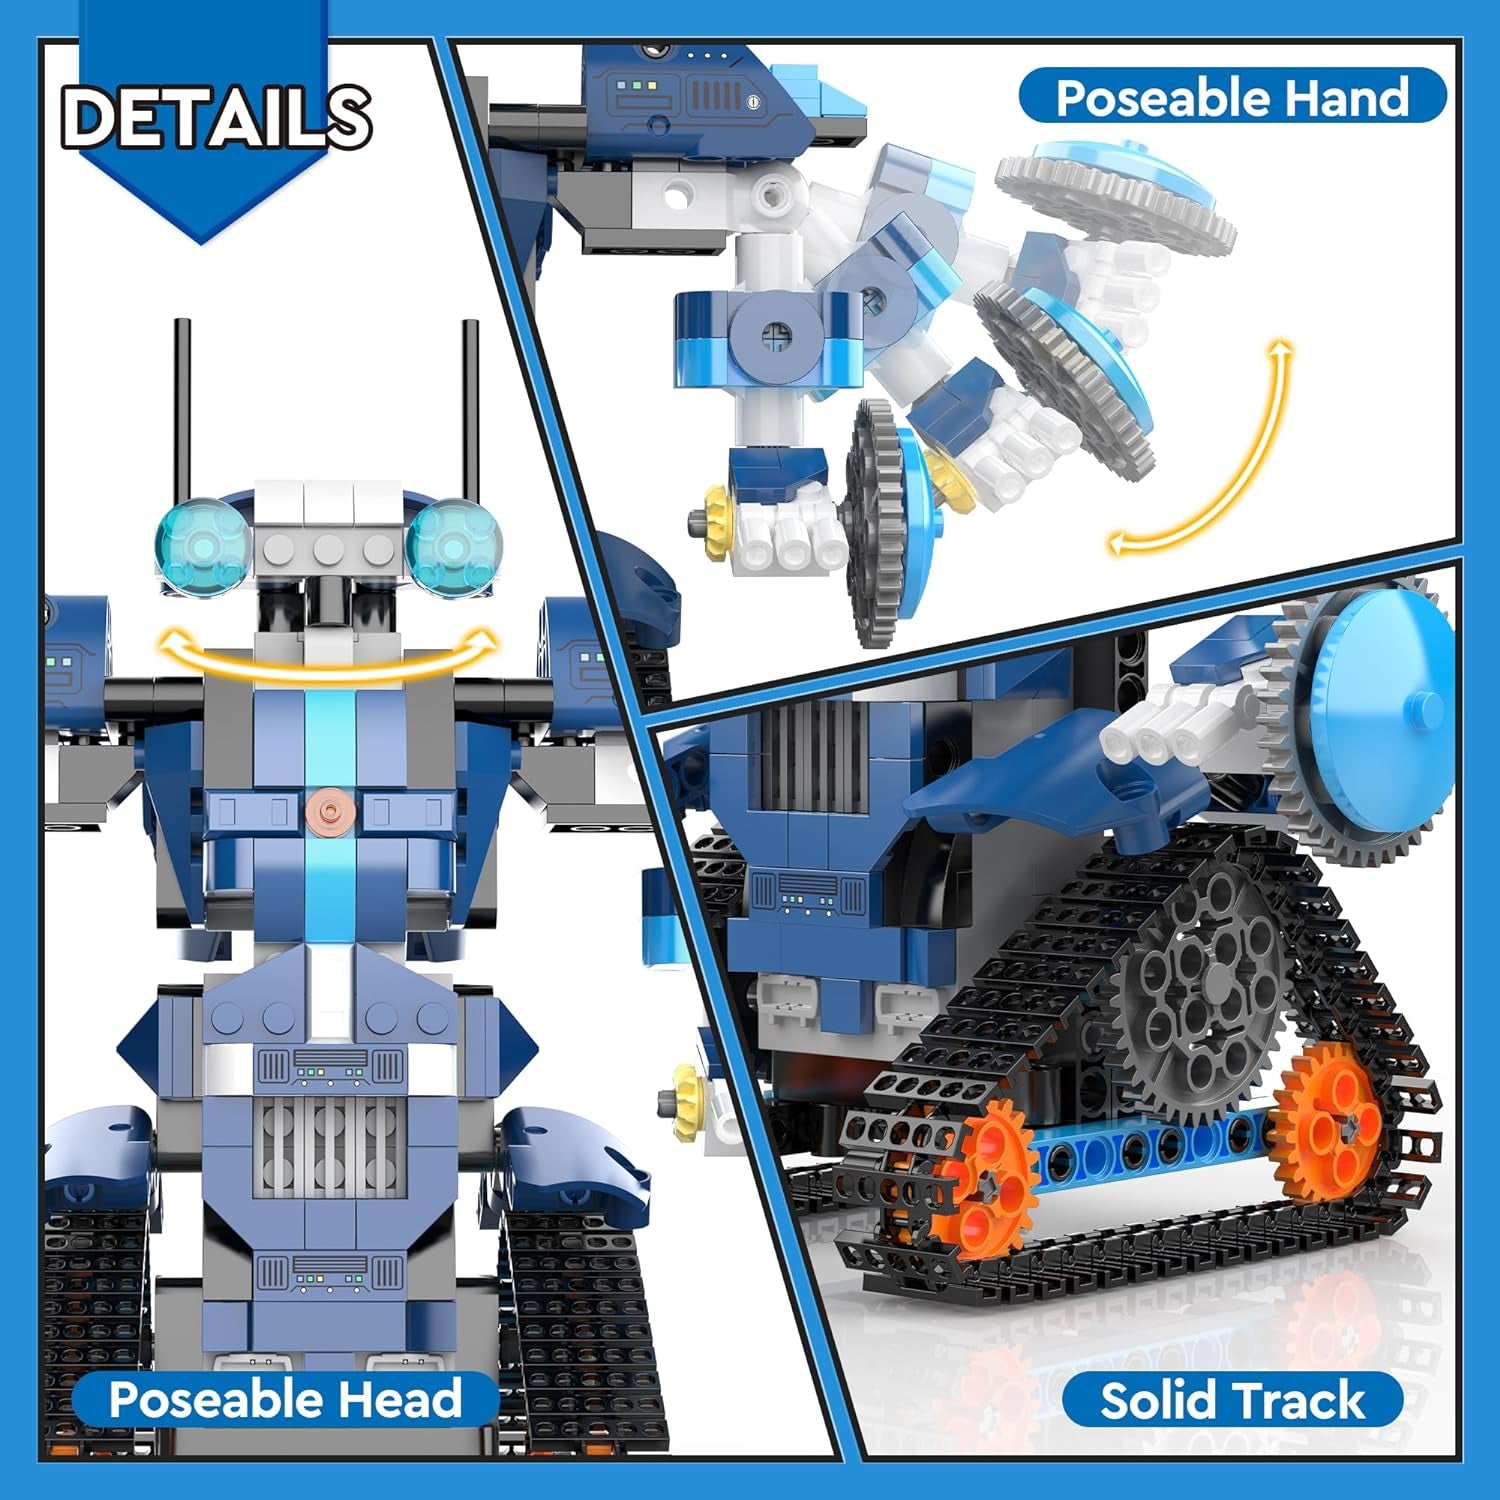 EDUCIRO STEM Project Robot Building Toys (433 Pieces), Christmas Birthday Gift Idea for Kids Boys Girls 8-12-14, Remote Control & APP Programmable Robot Building Kit, Compatible with Lego Set